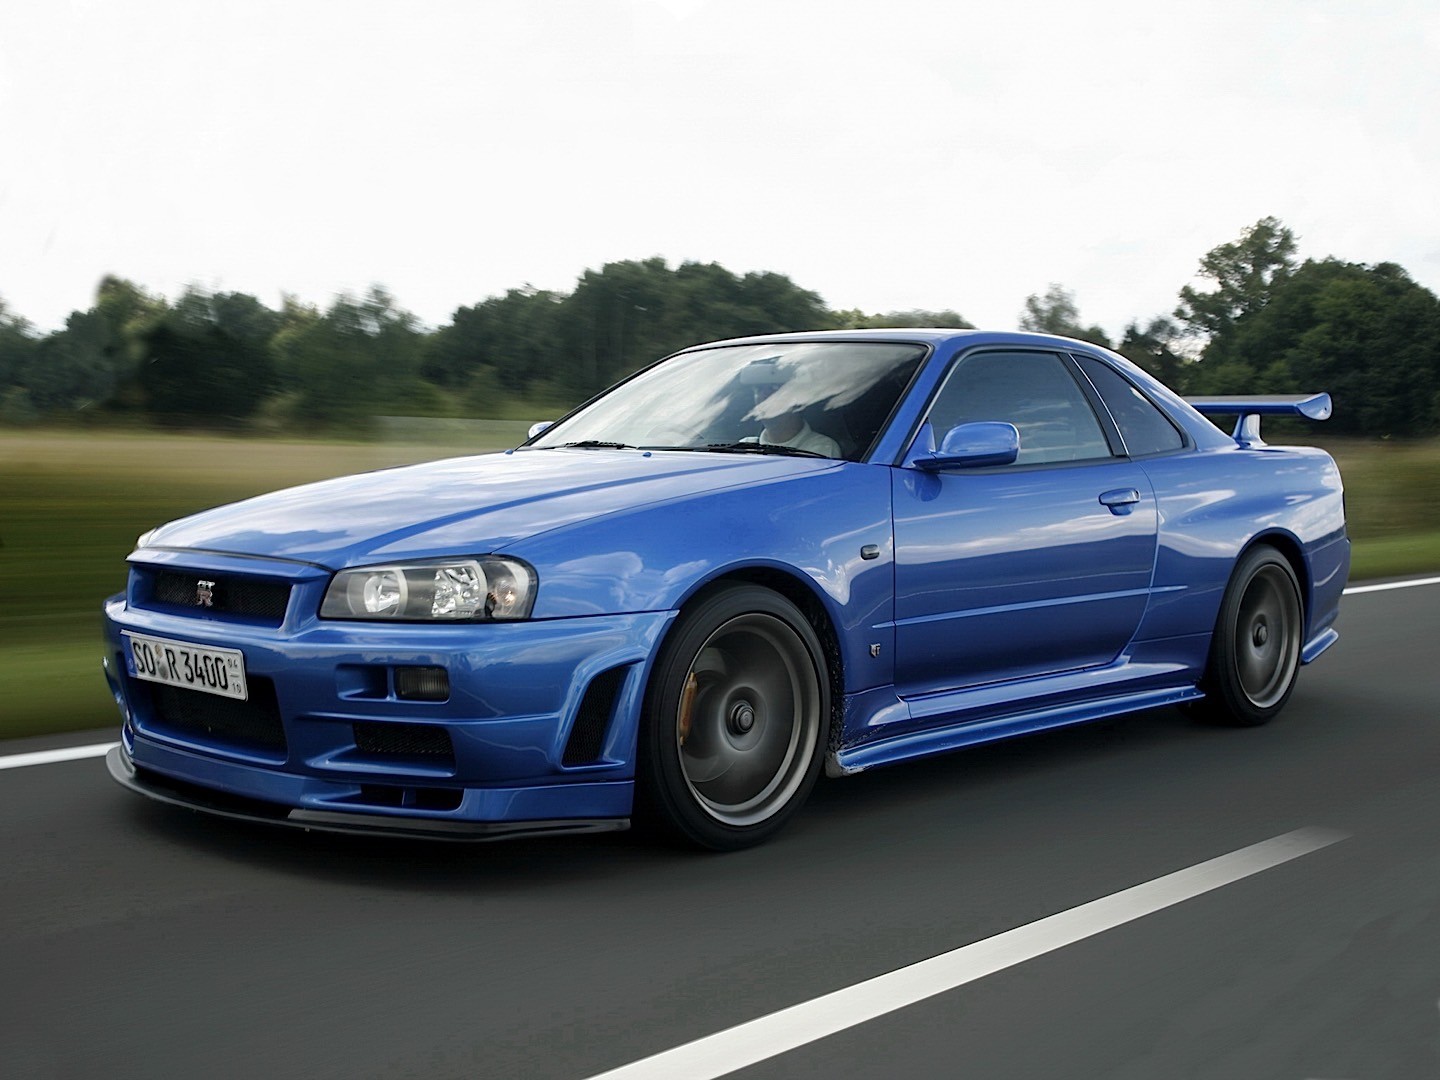 Nissan Skyline Wallpapers Vehicles Hq Nissan Skyline Pictures